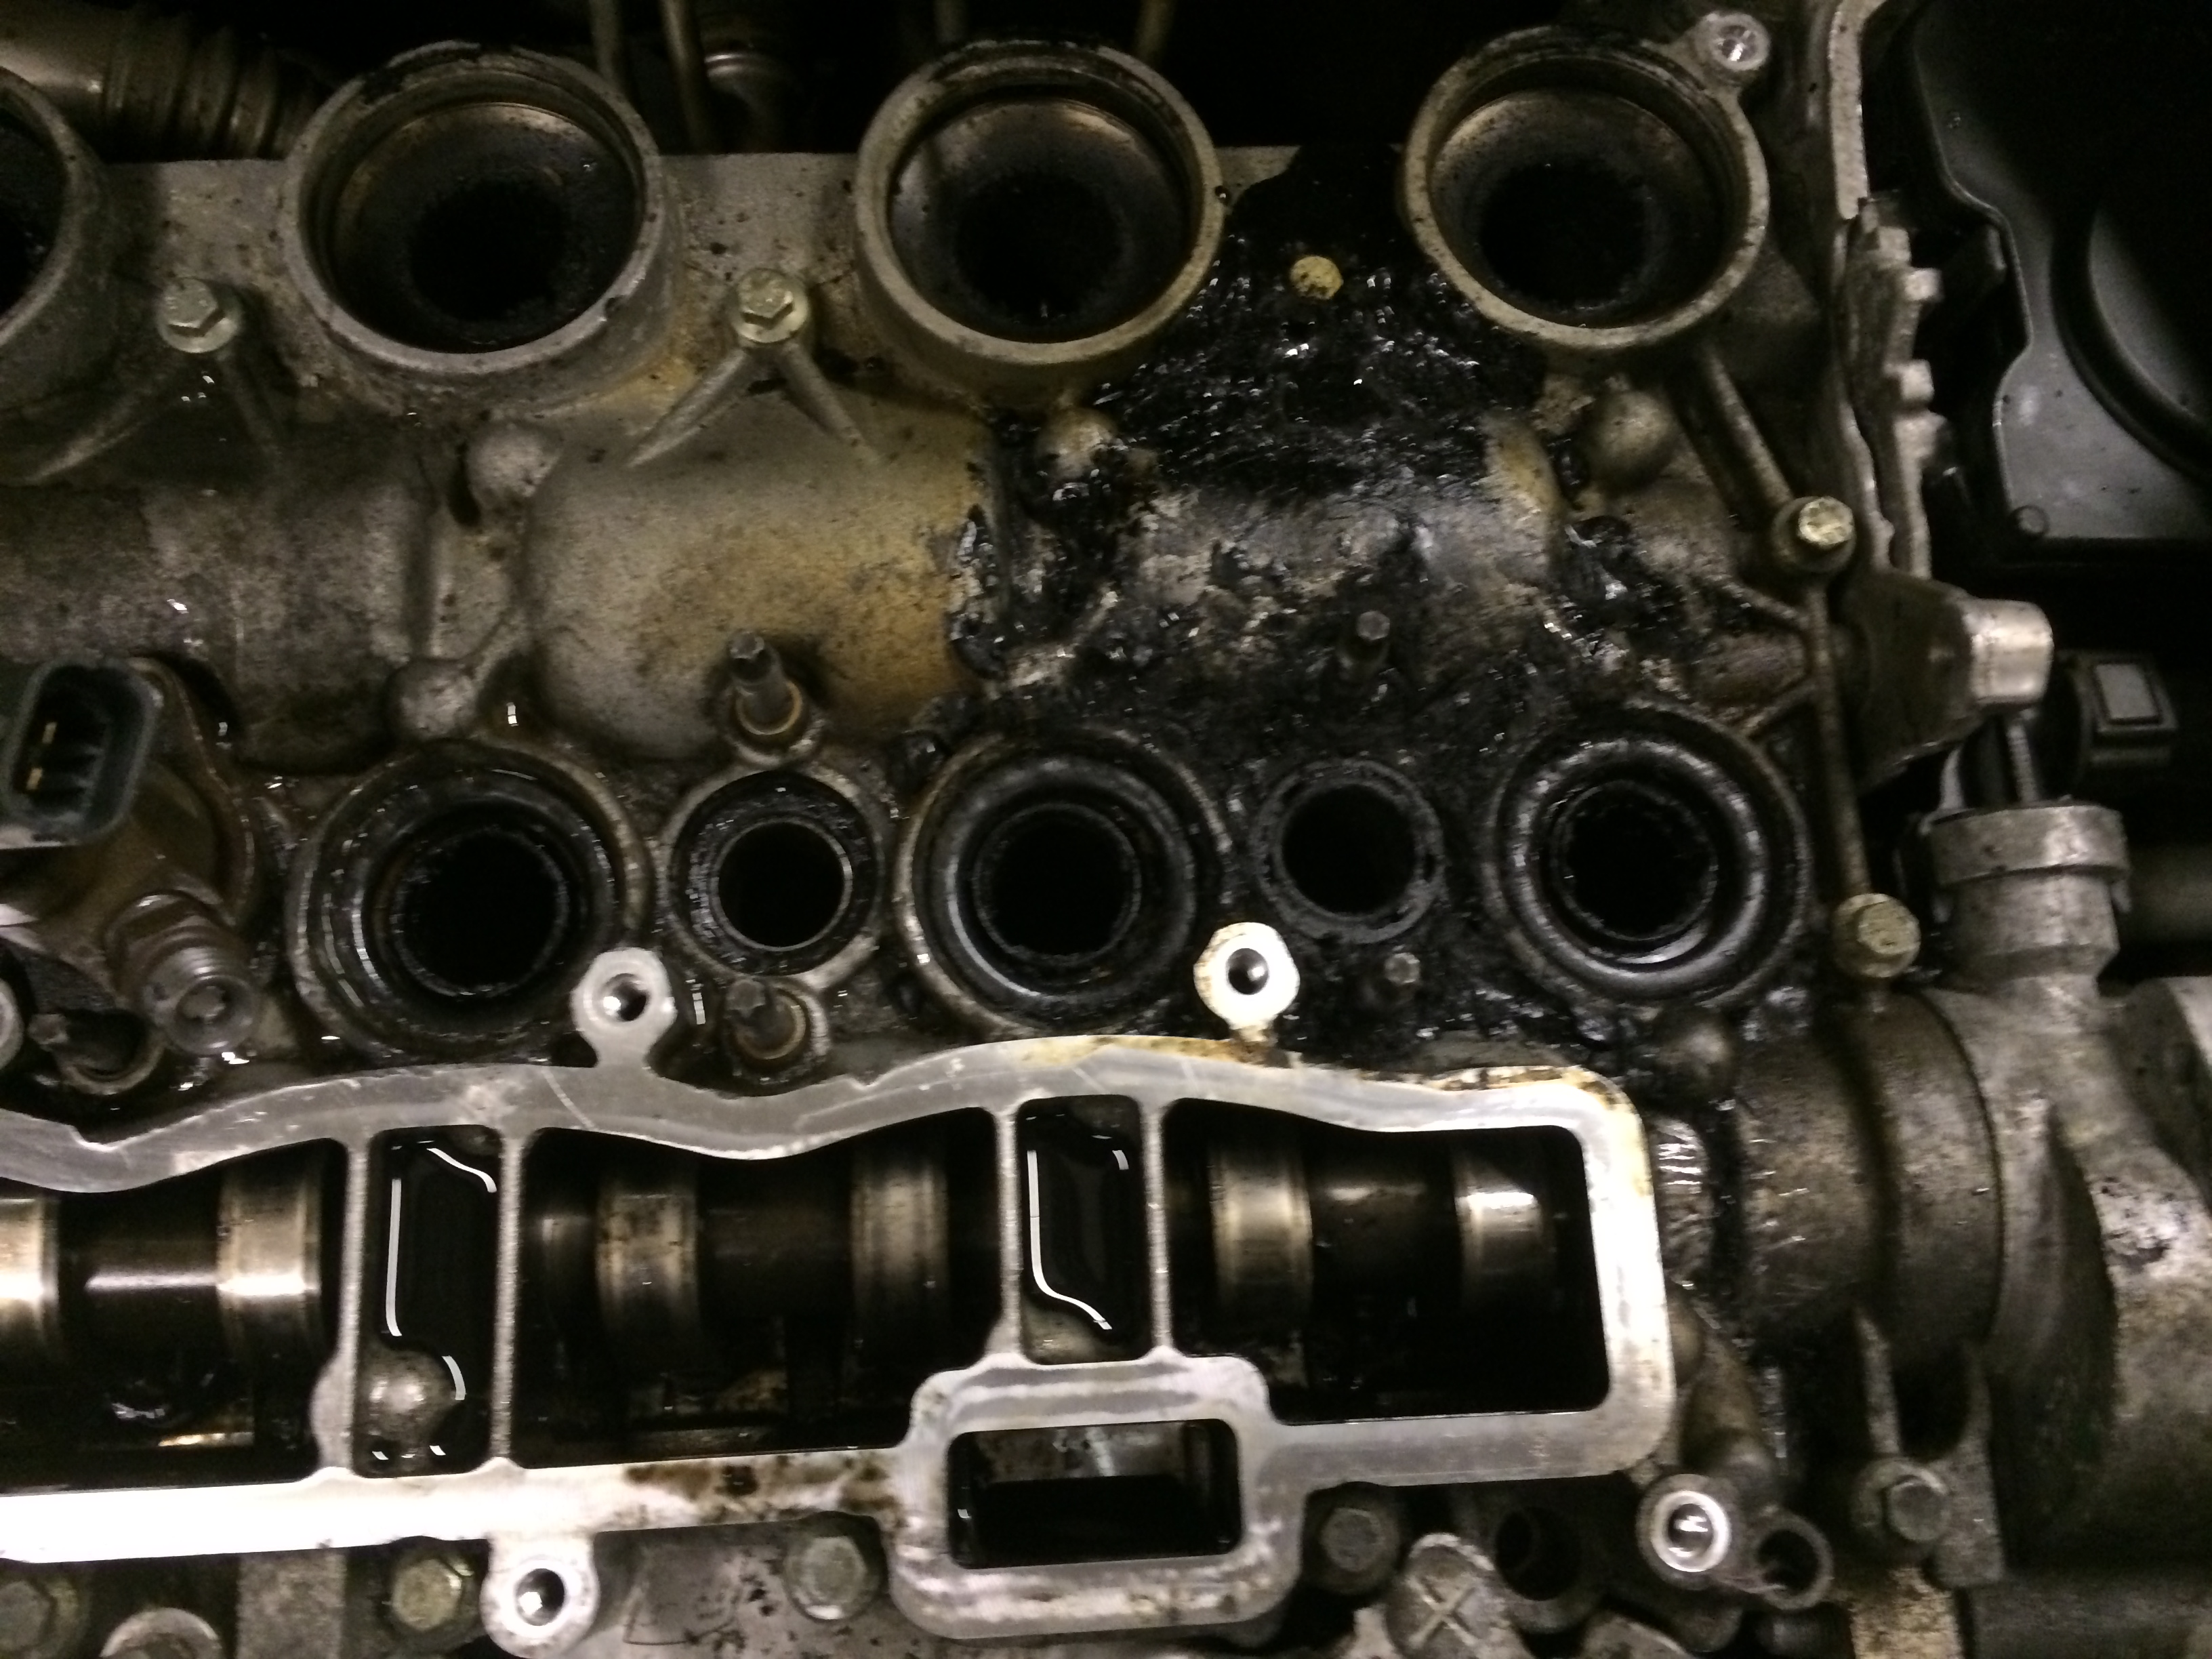 Forums / C4 Coupe and Hatch (pre 2011) Problems? / C4 High